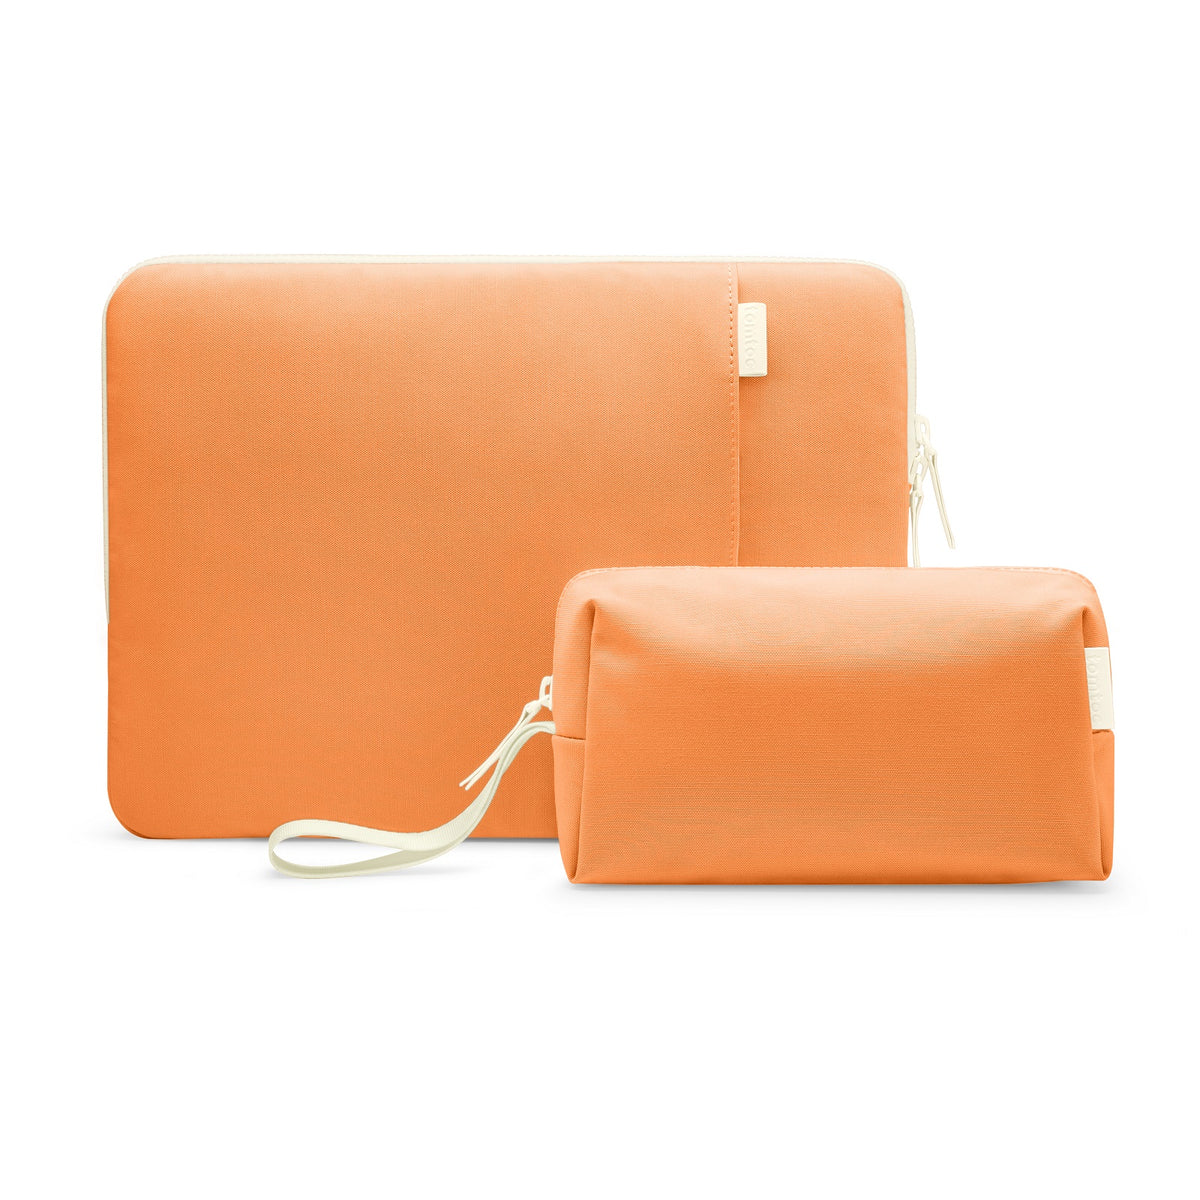 primary_Defender-A23 Jelly Laptop Sleeve Kit for 14-inch MacBook Pro M1 Pro/Max A2442 2021 | Orange